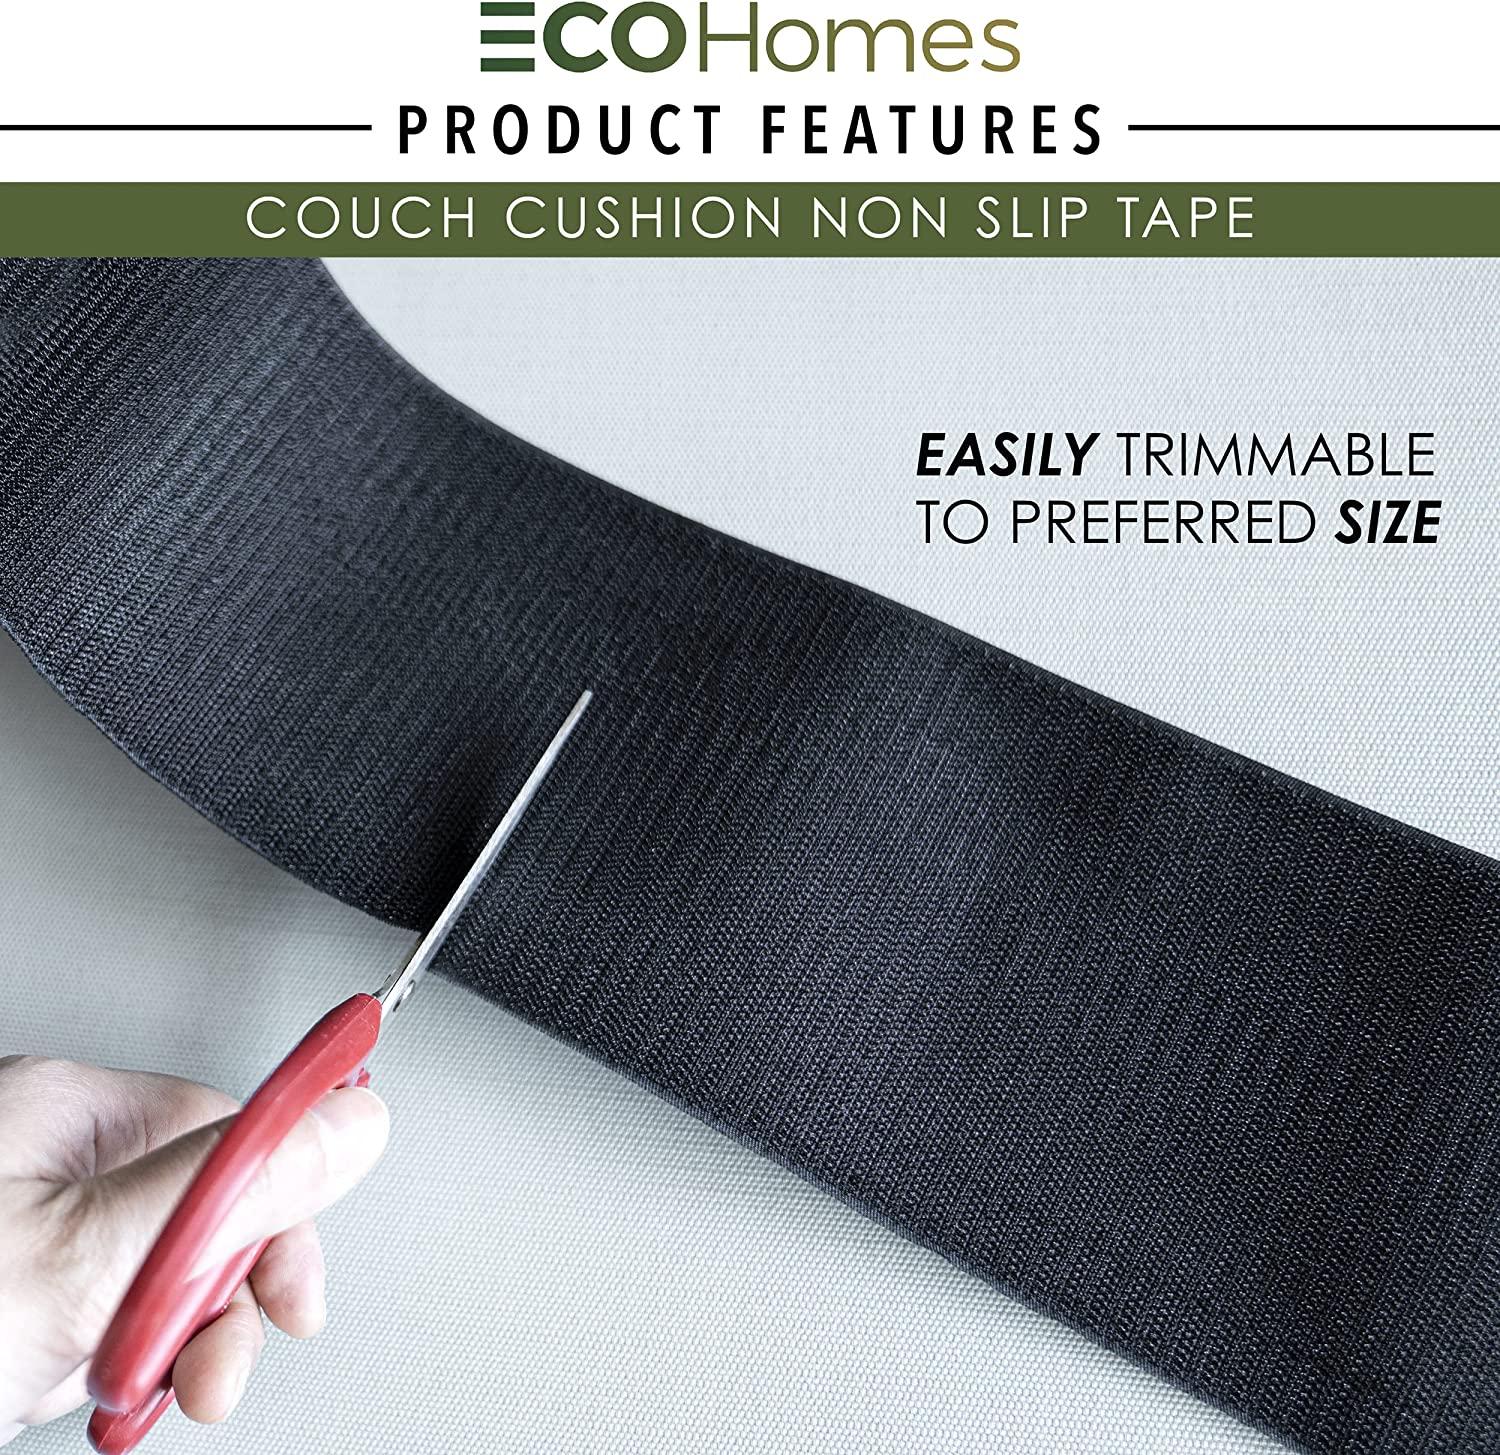 ECOHomes Couch Cushion Grip Tape Keep Couch Cushions from Sliding (5.9 x 10  FT) - Heavy Duty Non Slip Grip Tape, Hook and Loop with Adhesive